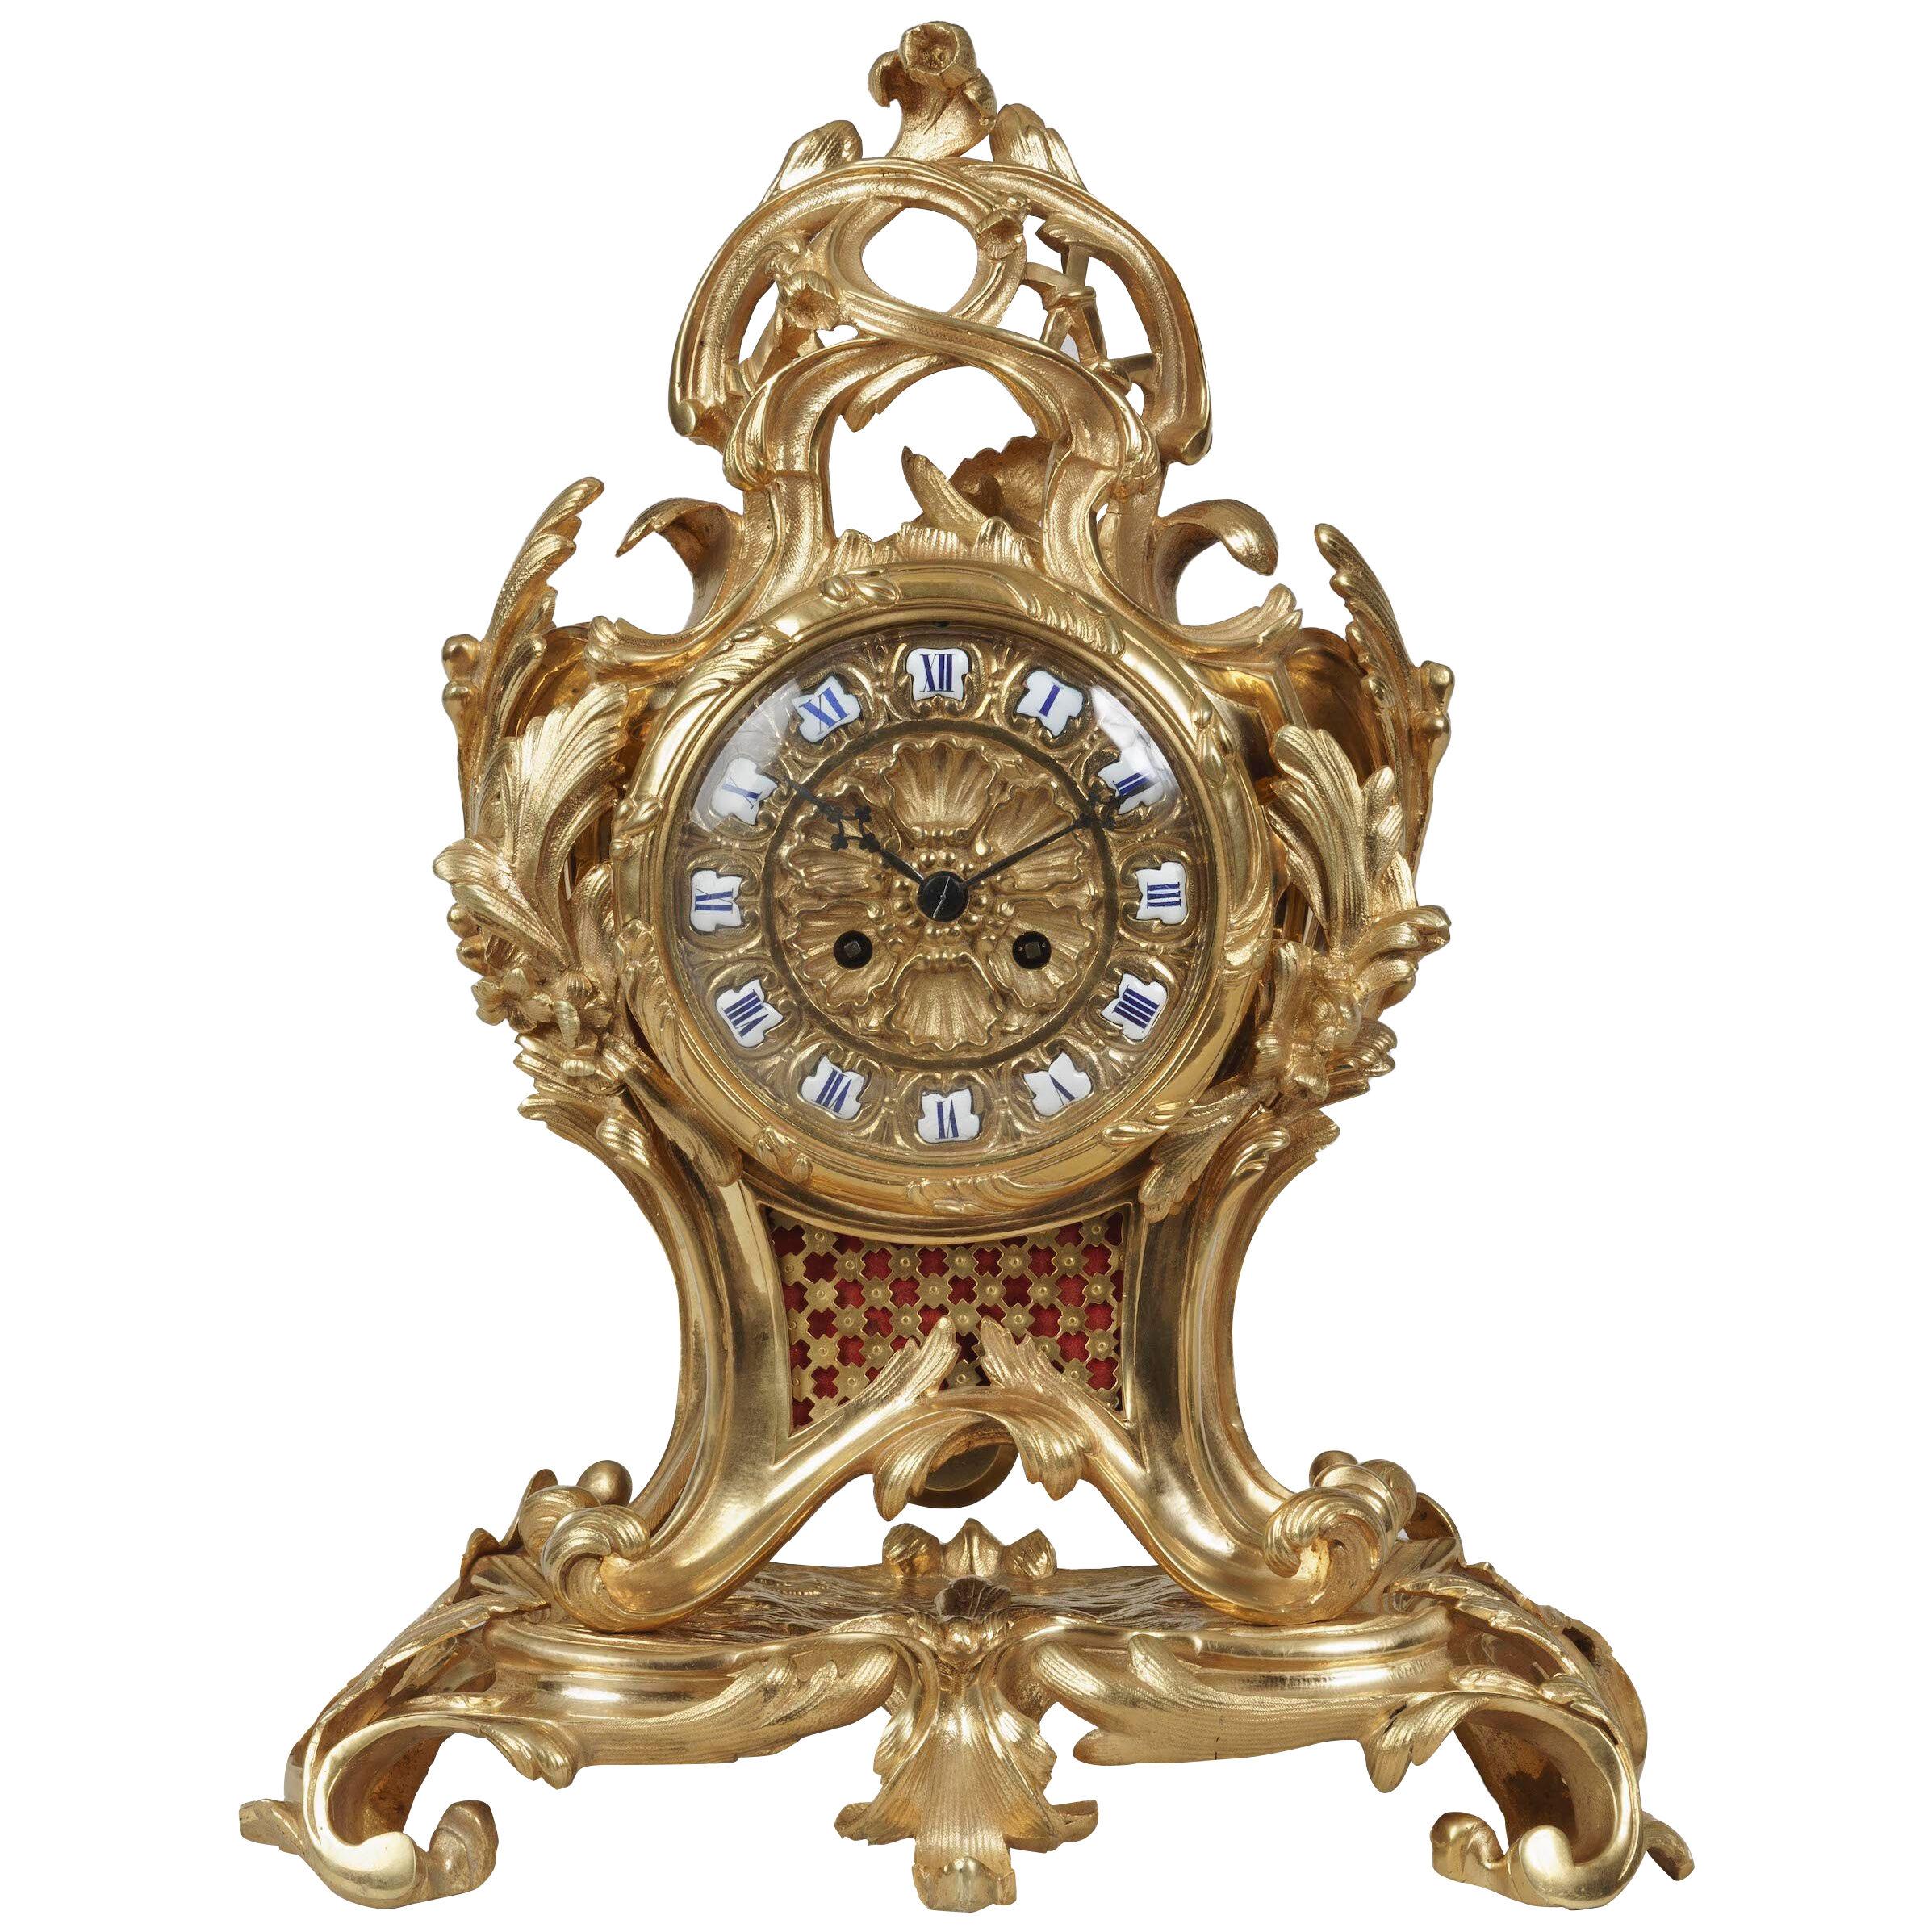 19th Century Mantle Clock In the Louis XV Manner